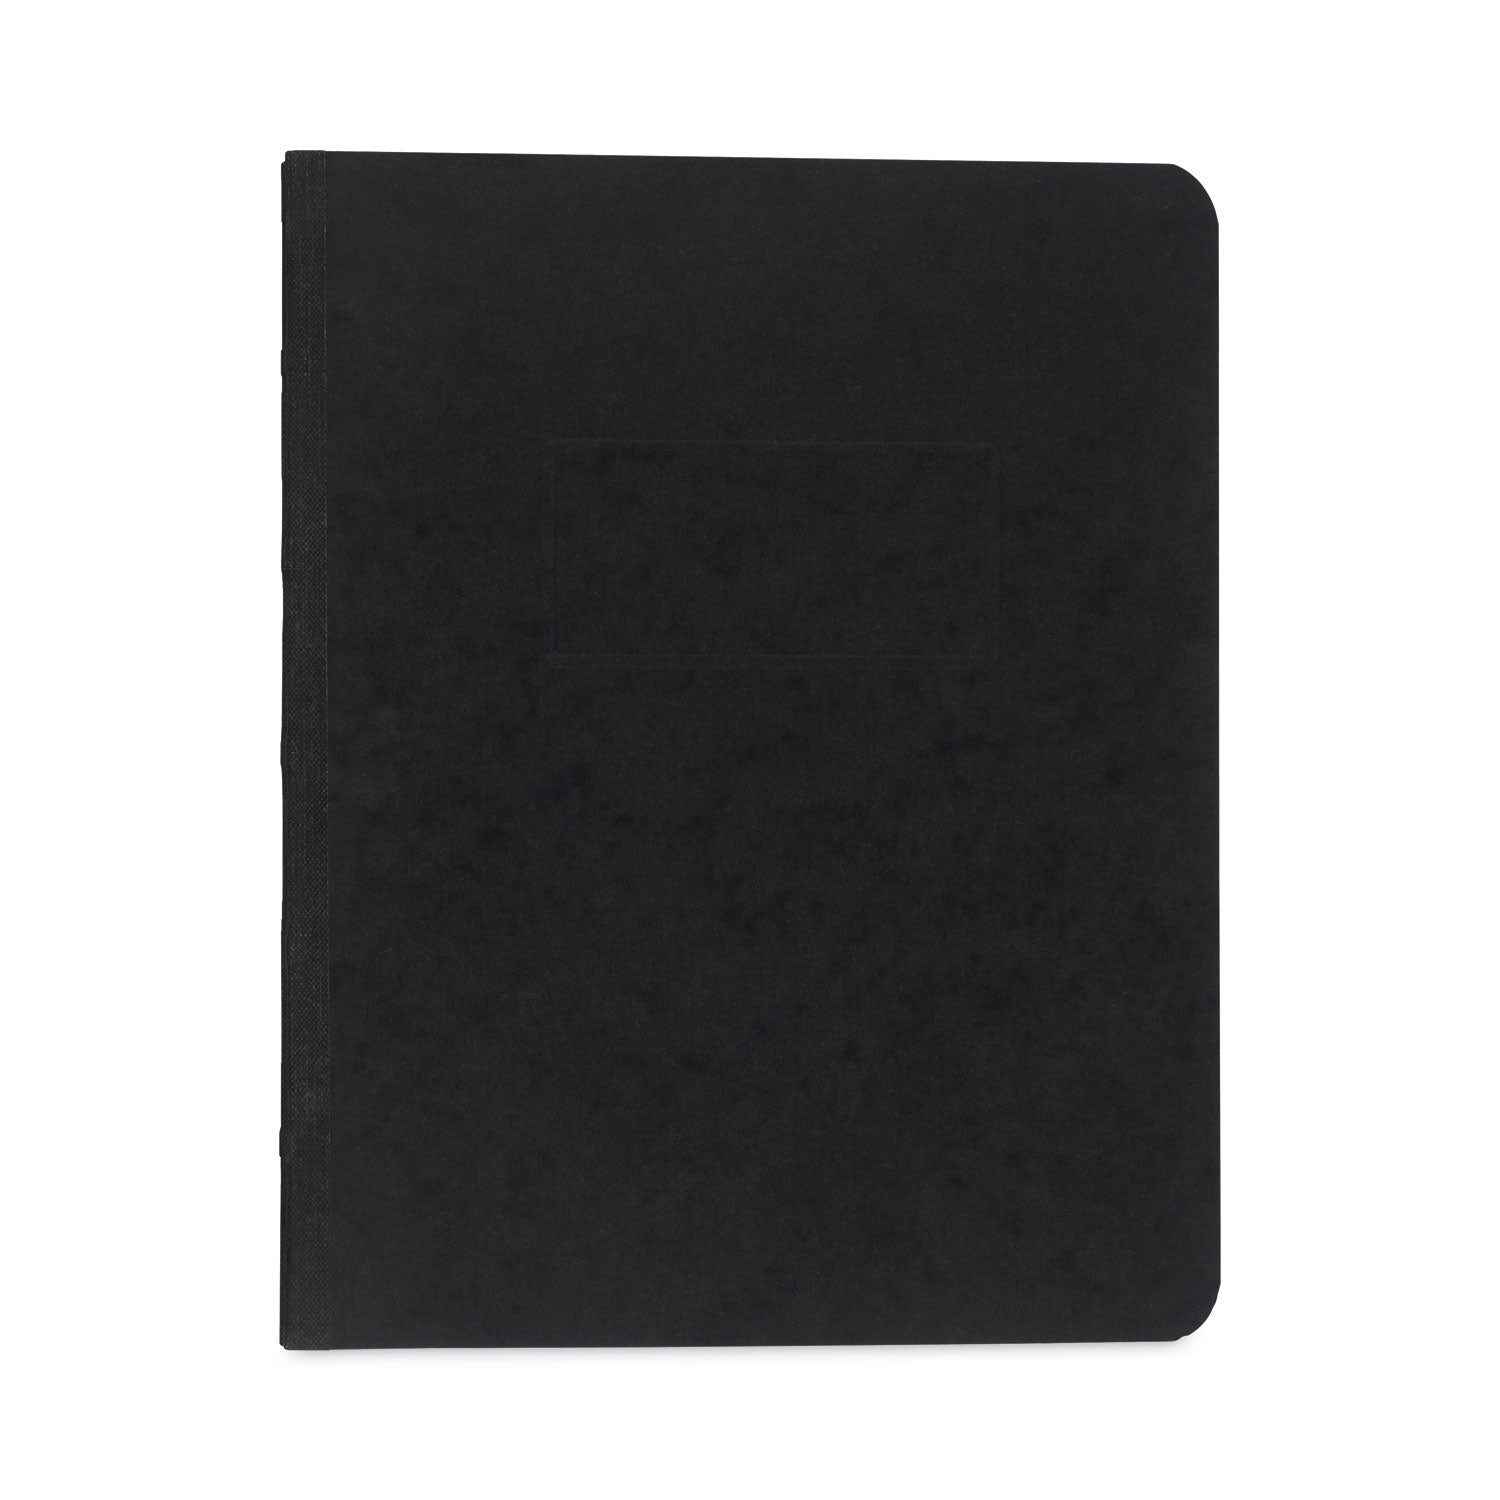 Pressboard Report Cover with Tyvek Reinforced Hinge, Two-Piece Prong Fastener, 3" Capacity, 8.5 x 11, Black/Black - 